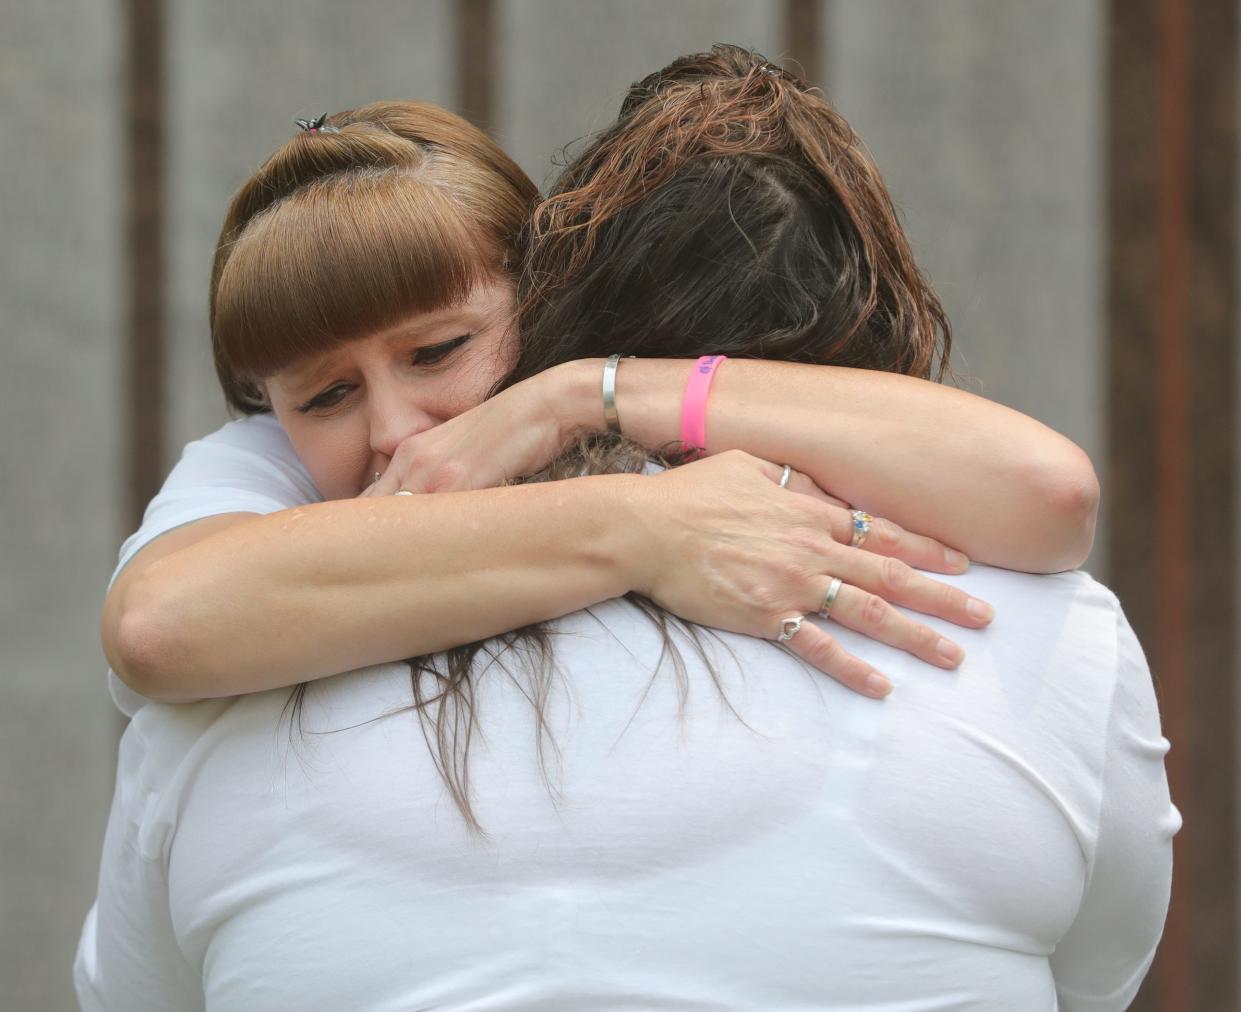 Kim Dudley, left, hugs Becky Woods after an interview interview outside the Summit County Courthouse Wednesday in which they shared memories of their best friend Lisbeth Dayton who was killed in a May 2022 wrong-way crash on Interstate 76. Jessica Skinner pleaded guilty to aggravated vehicular homicide related to the crash Wednesday. She will be sentenced Oct. 11.